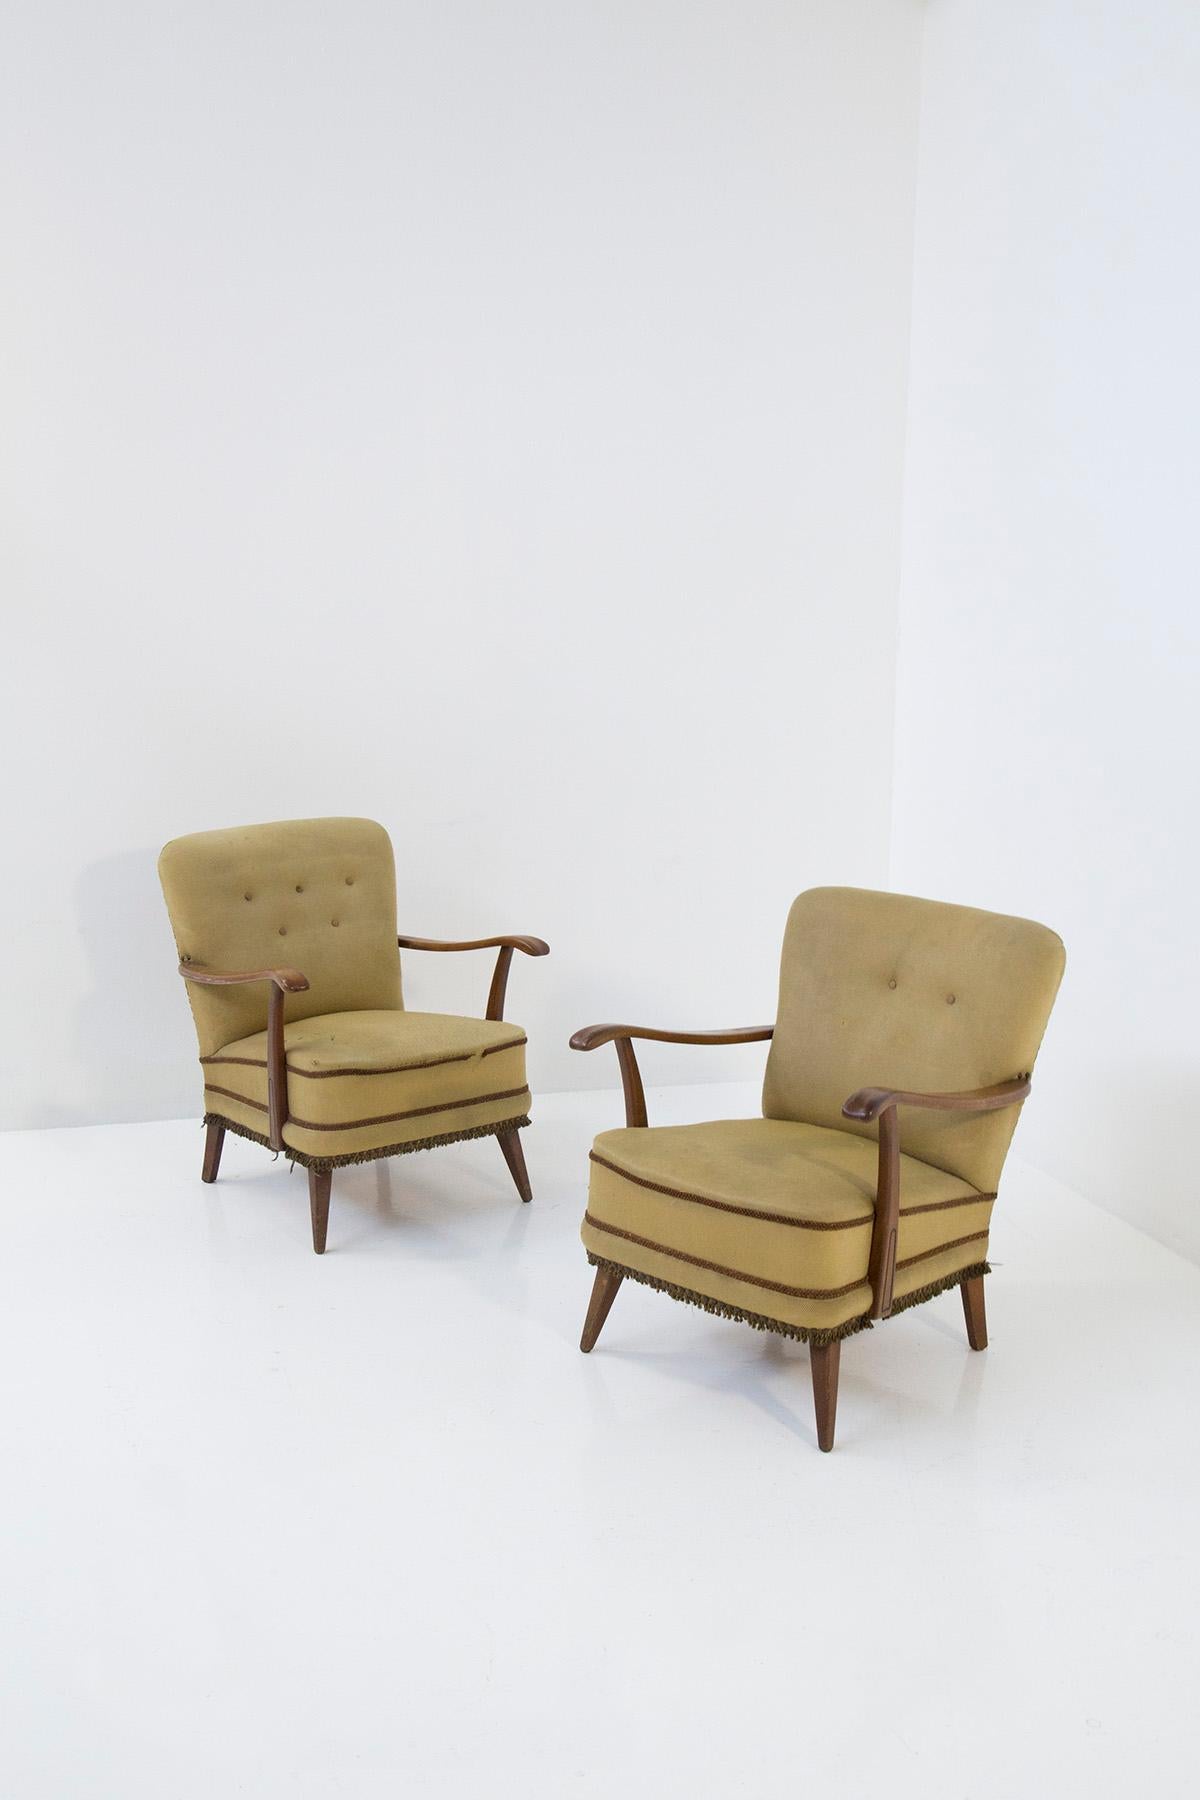 Enter a realm where time has stood still, where the essence of mid-century Italian design comes to life in the form of an elegant pair of armchairs. These are no ordinary chairs; they are a testament to the creative genius of Paolo Buffa, a master